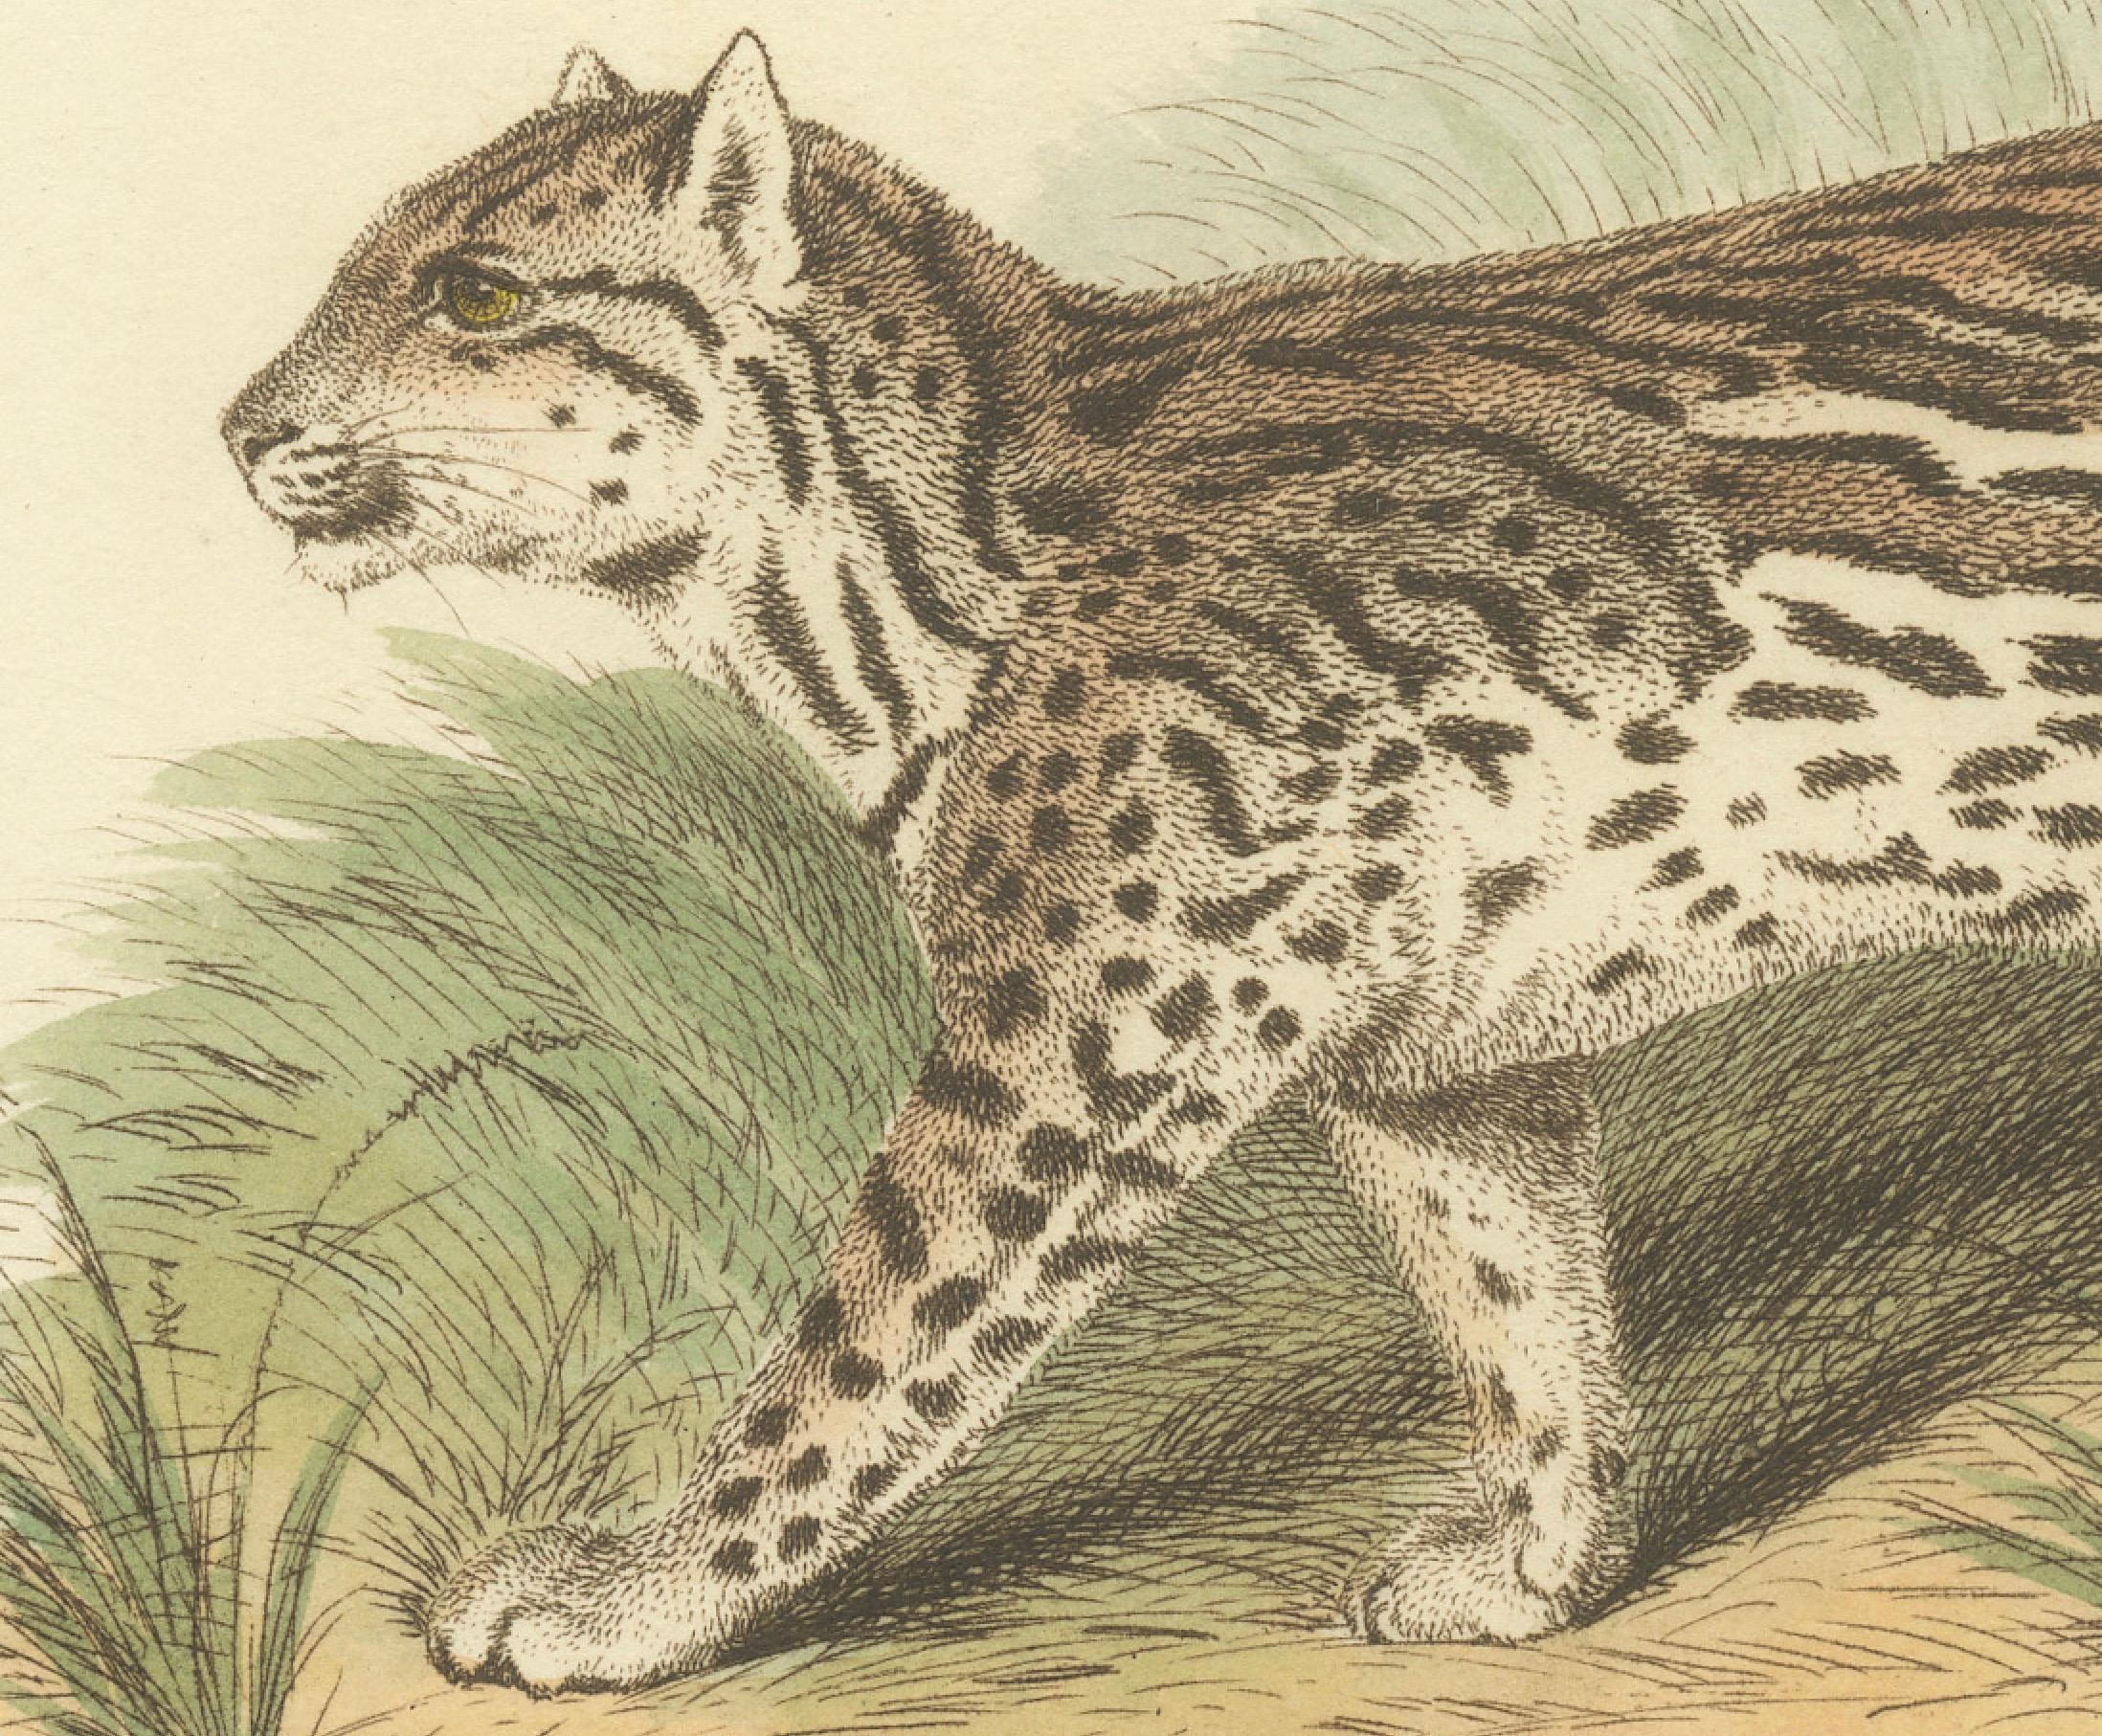 The engraving presents an ocelot, scientific name Leopardus pardalis, in a naturalistic setting, illustrating the animal in mid-stride, which showcases its spotted coat and muscular build. The ocelot's gaze is directed forward, imbuing the image